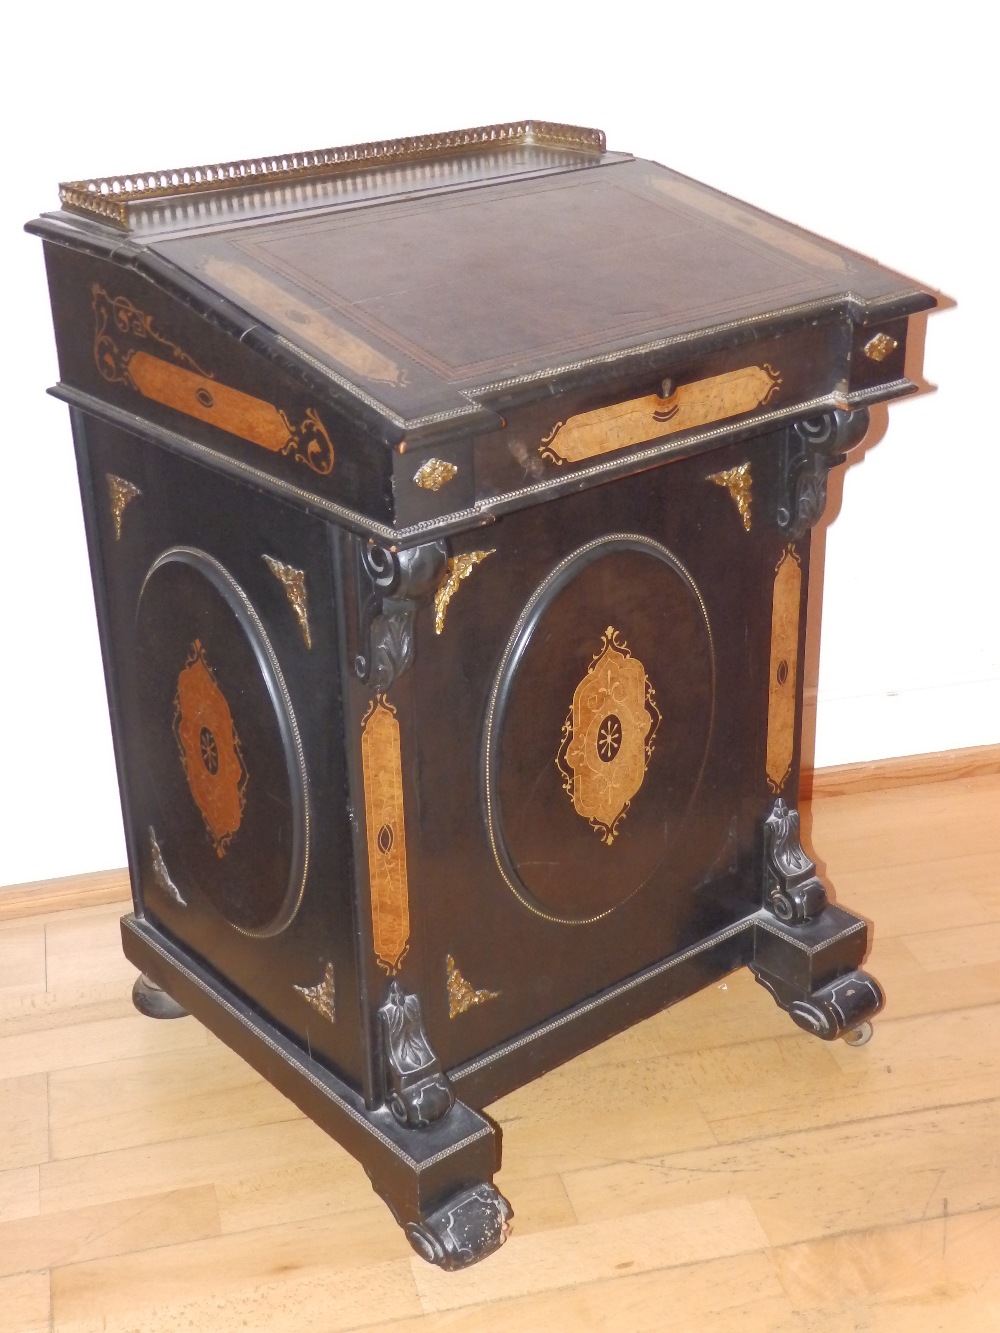 A Victorian ebonised davenport with marquetry walnut panels and ormolu mounts, the threequarter